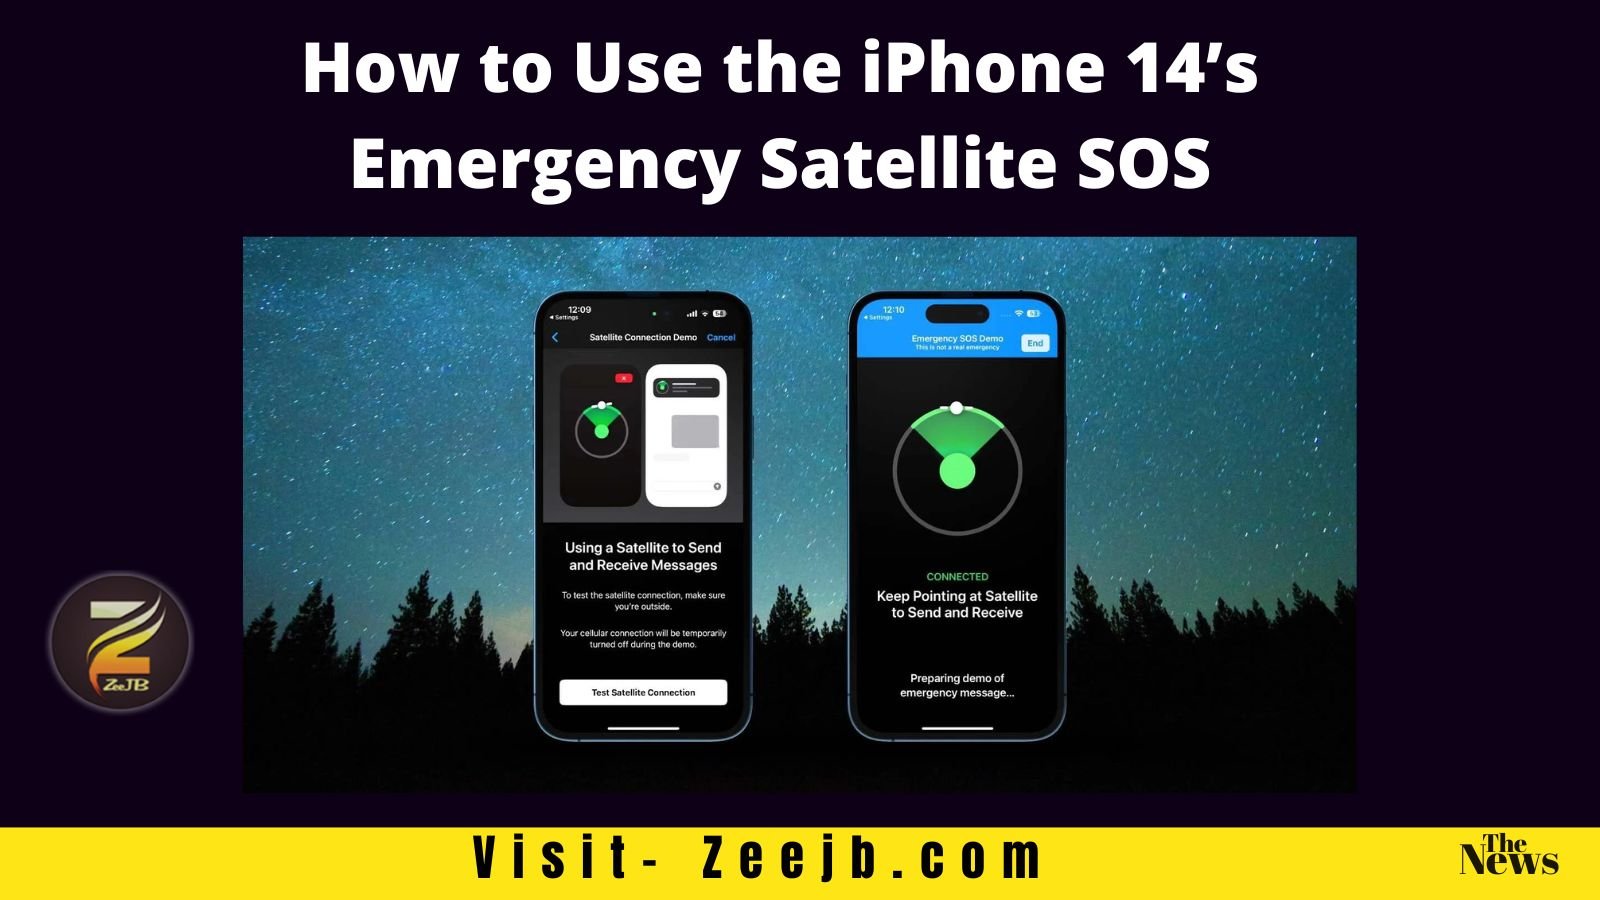 How to Use the iPhone 14’s Emergency Satellite SOS